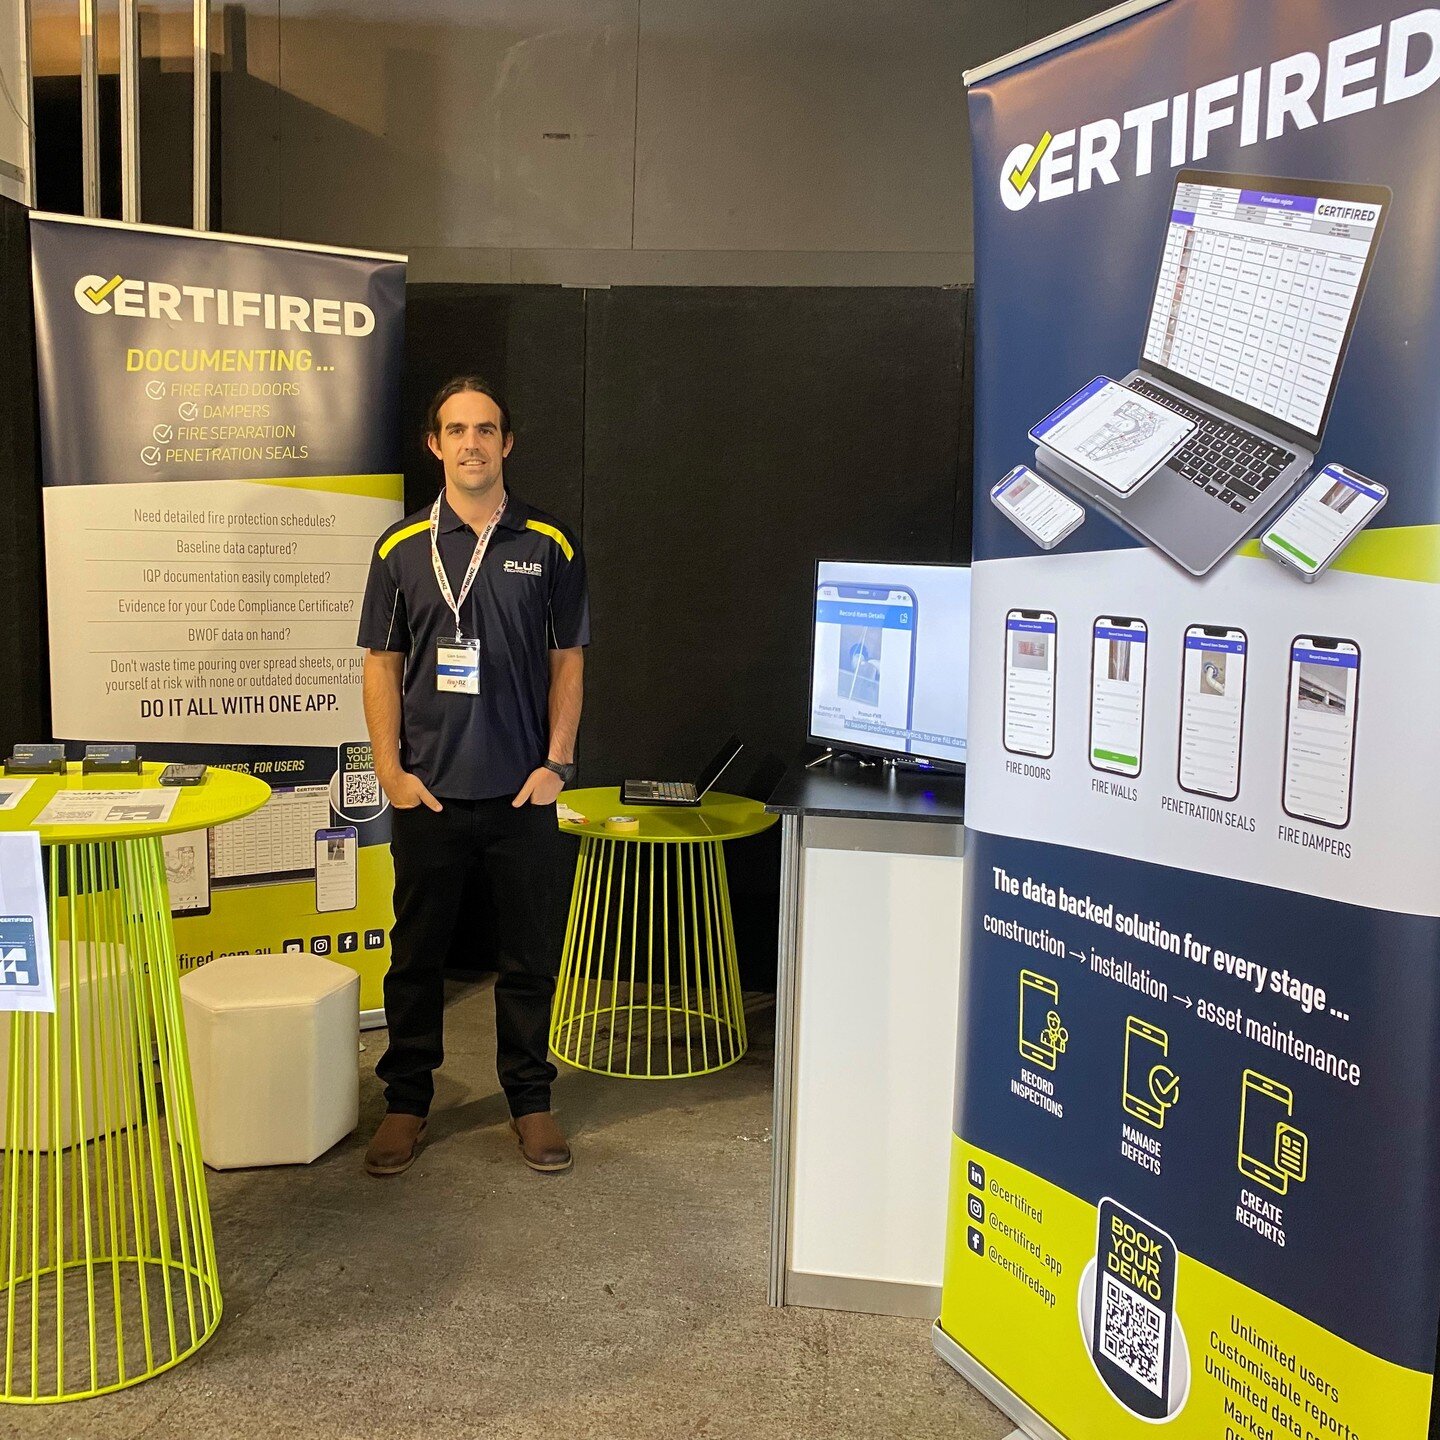 NZ fire industry and owners - Are you ready for AS1851 for your building maintenance?

We&rsquo;re currently demonstrating Certifired at #FireNZ where there&rsquo;s great interest around the potential for NZ to adopt AS1851, David P. Isaac gave a gre